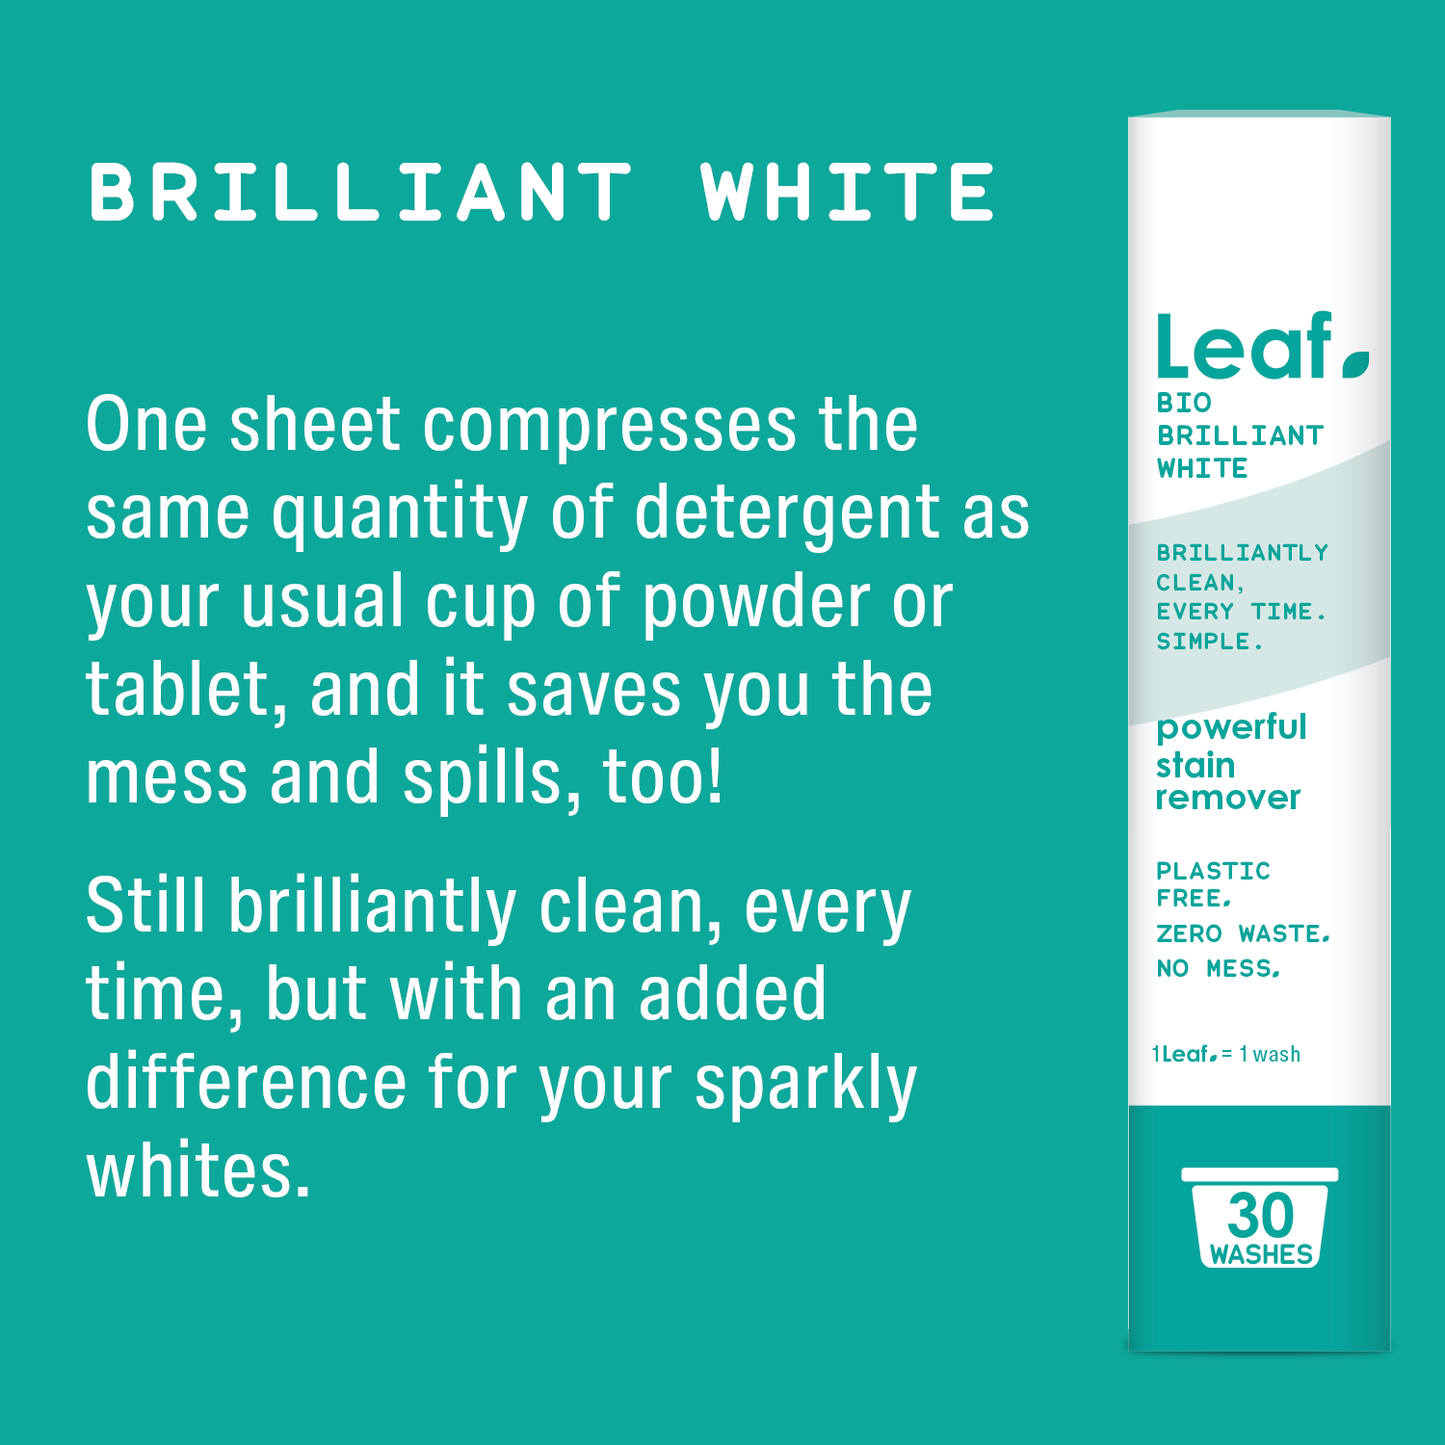 Leaf, bio brilliant white, one sheet equals a cup of powder or one laundry pod.